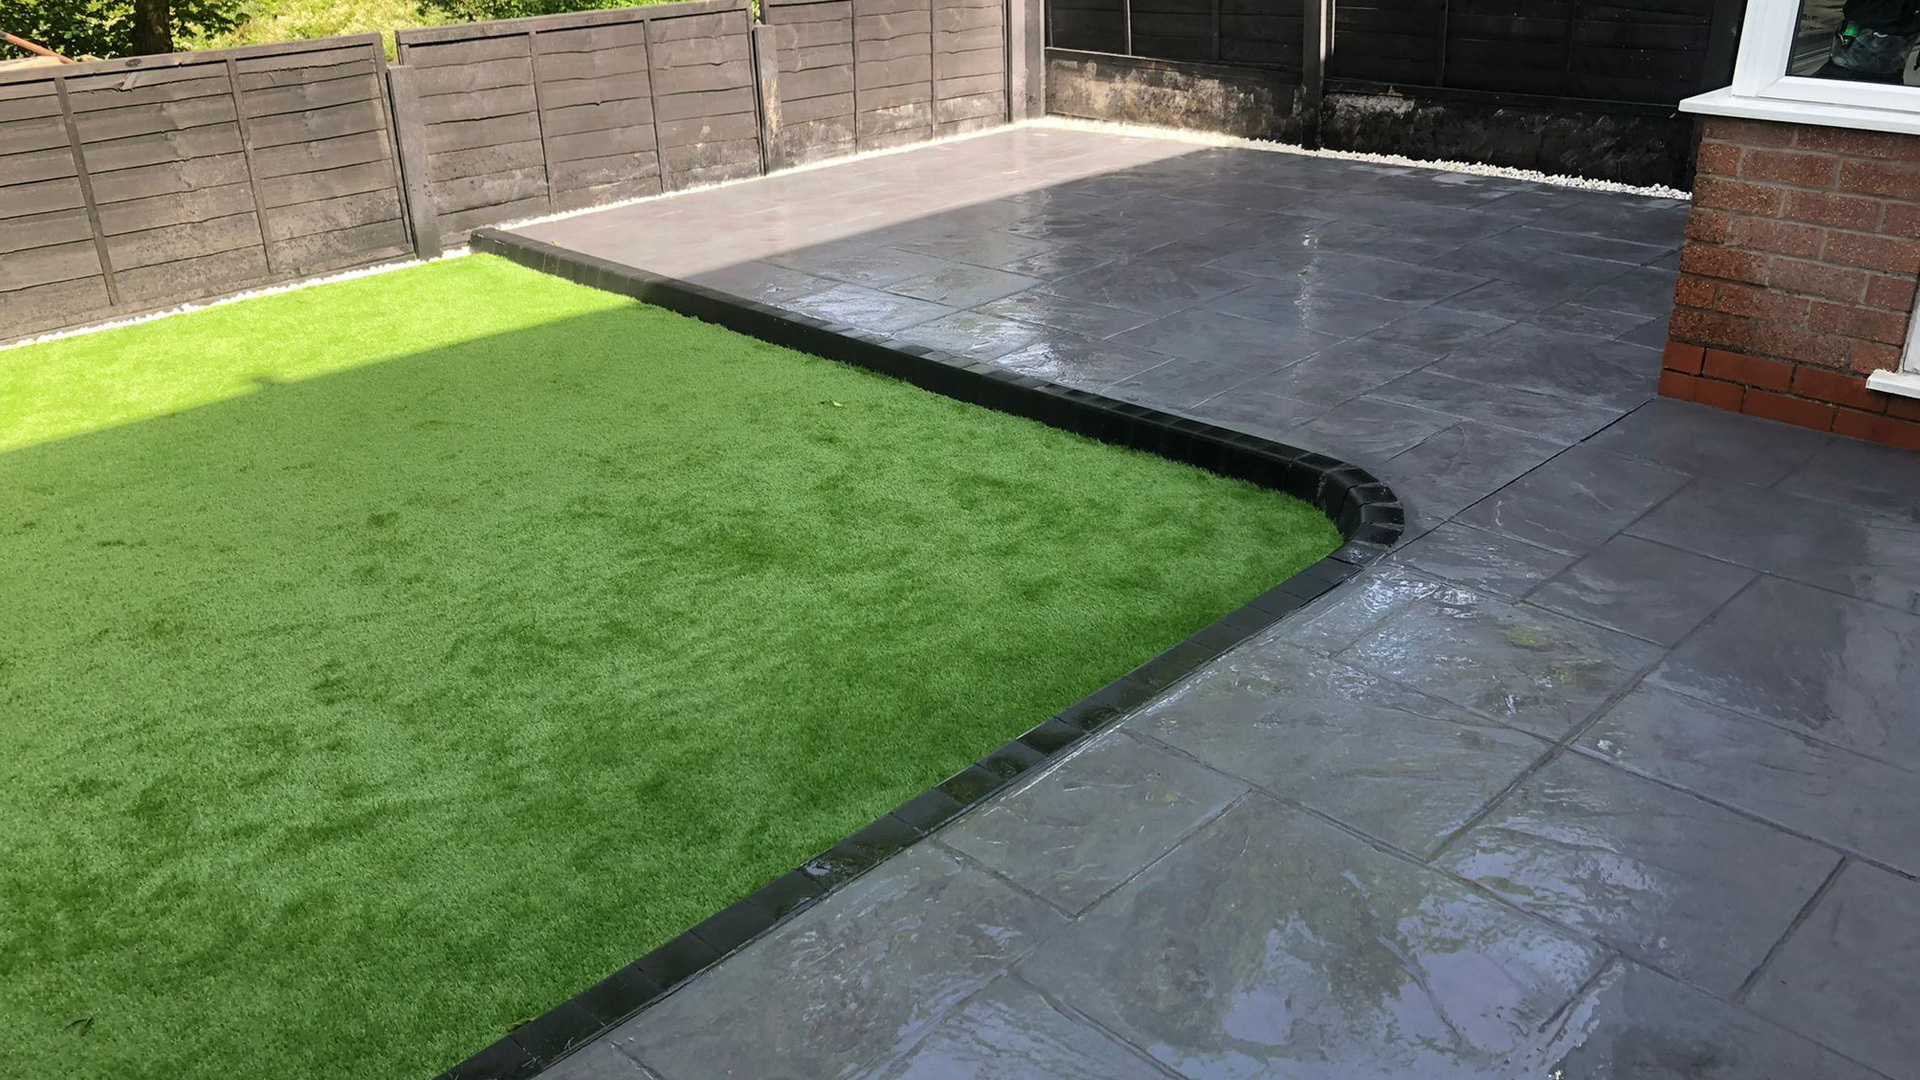 Supreme Resin Driveways -  We specialise in artificial grass installations and we only use the highest quality, fake lawn materials available. We are based in Tameside and do lots of fake grass installations in and around the local areas, so if you are looking for artificial grass lawn then give us a call.